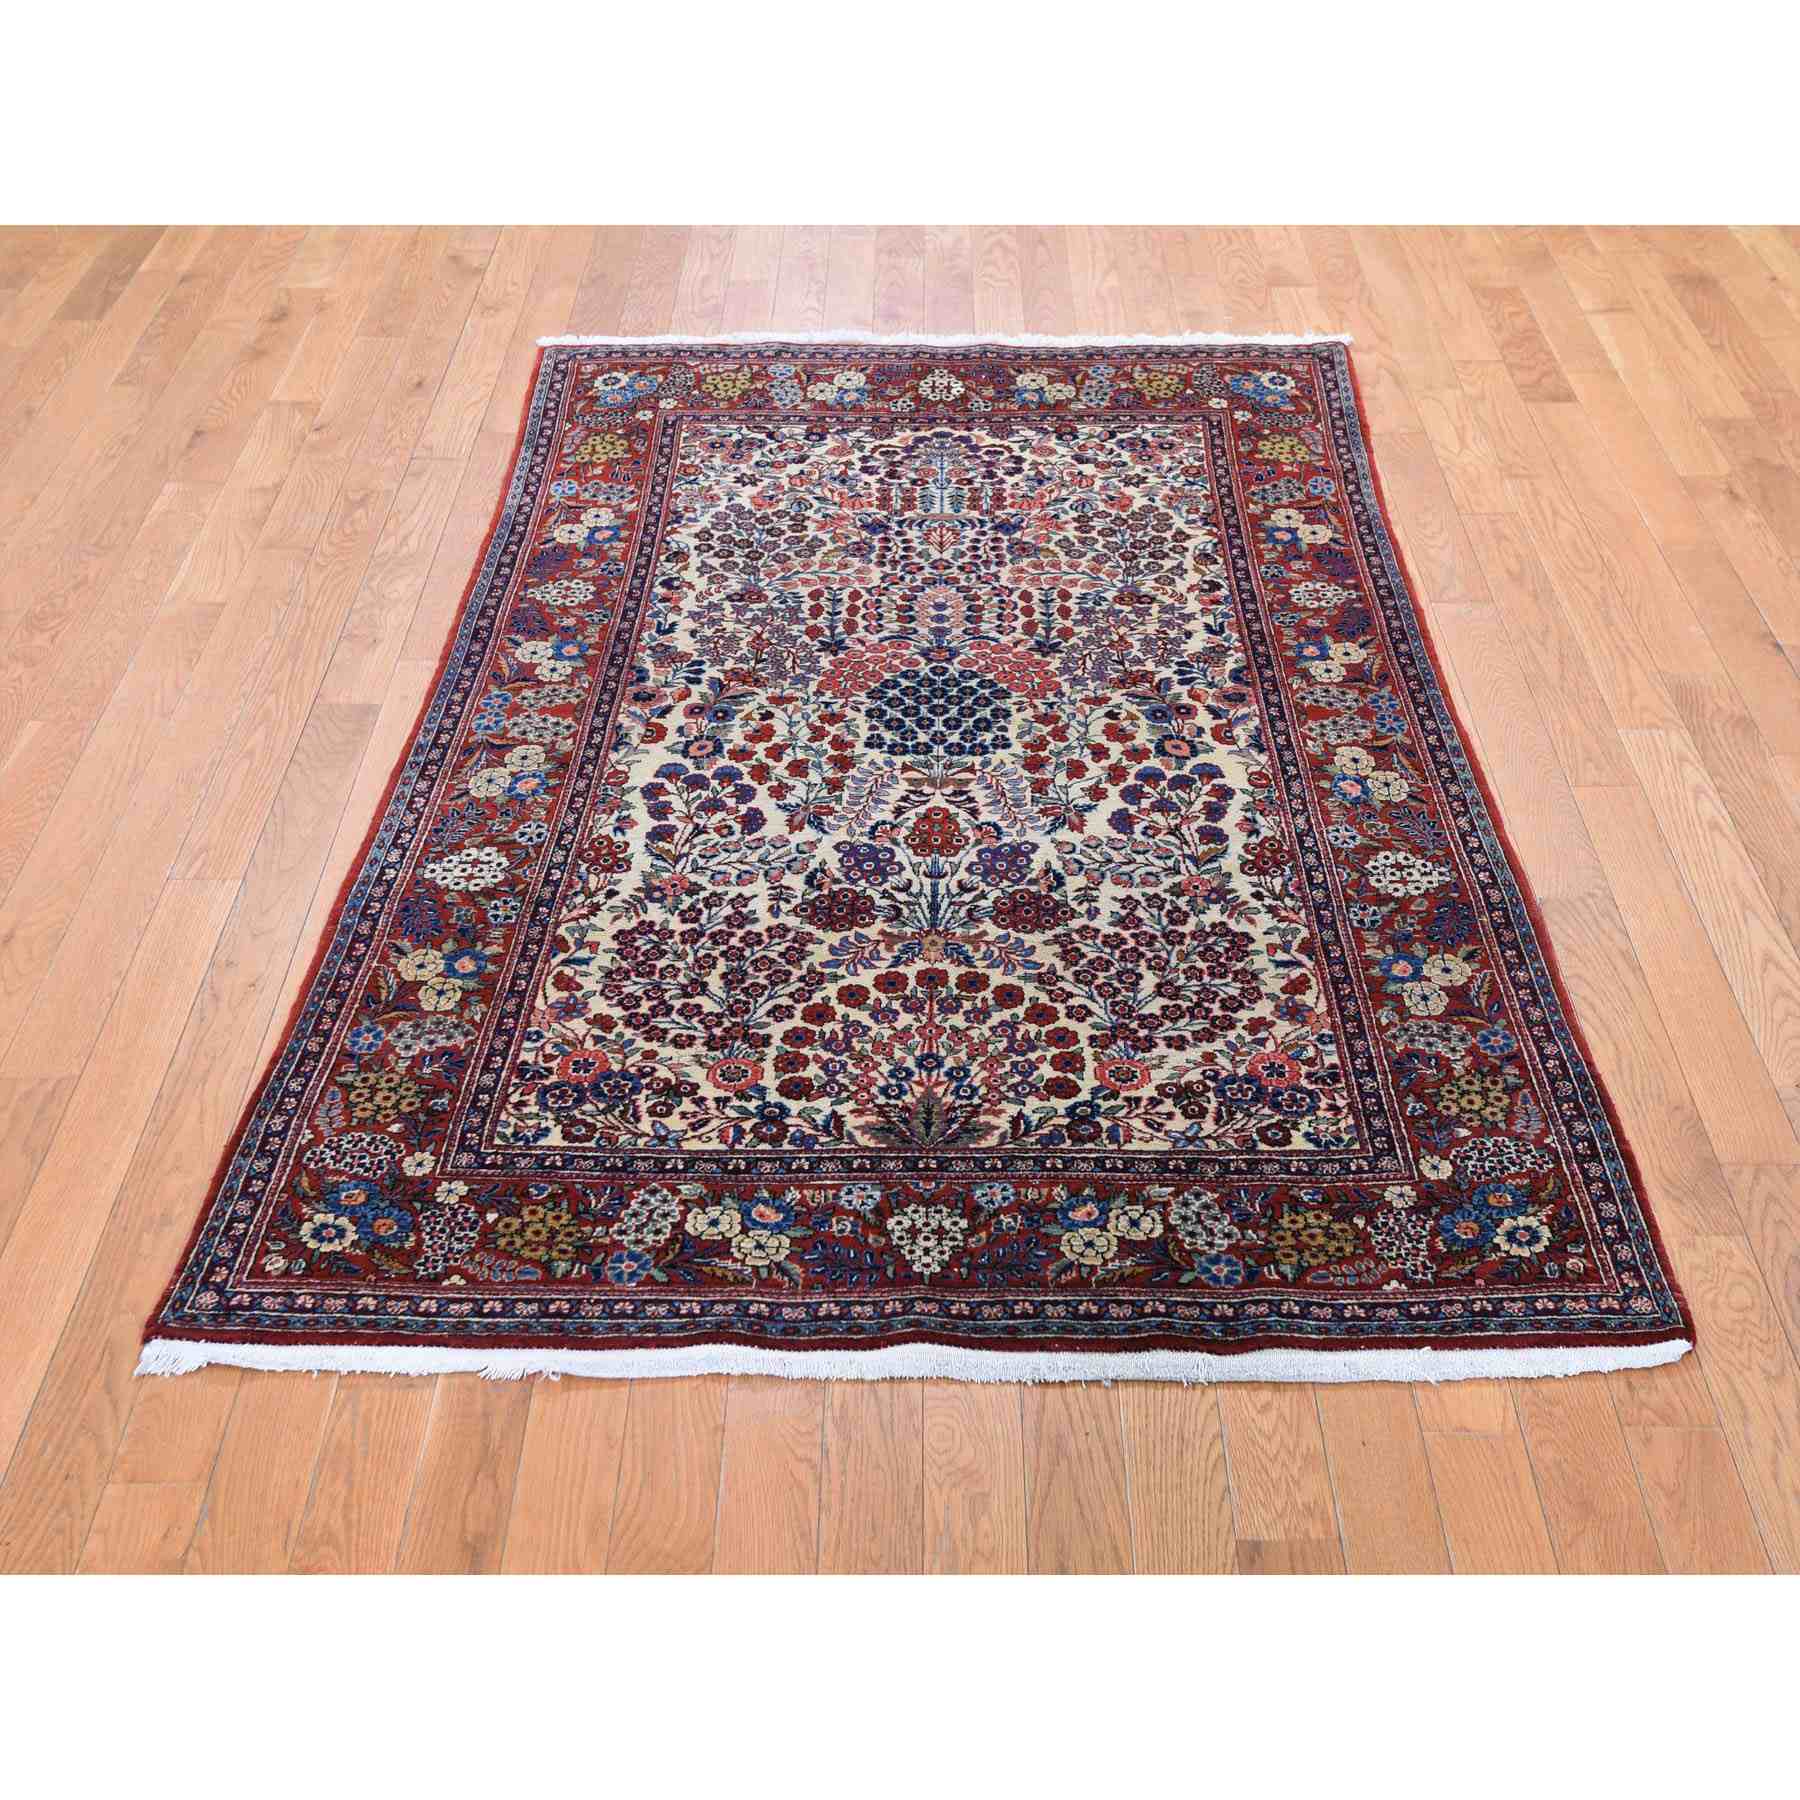 Antique-Hand-Knotted-Rug-243505